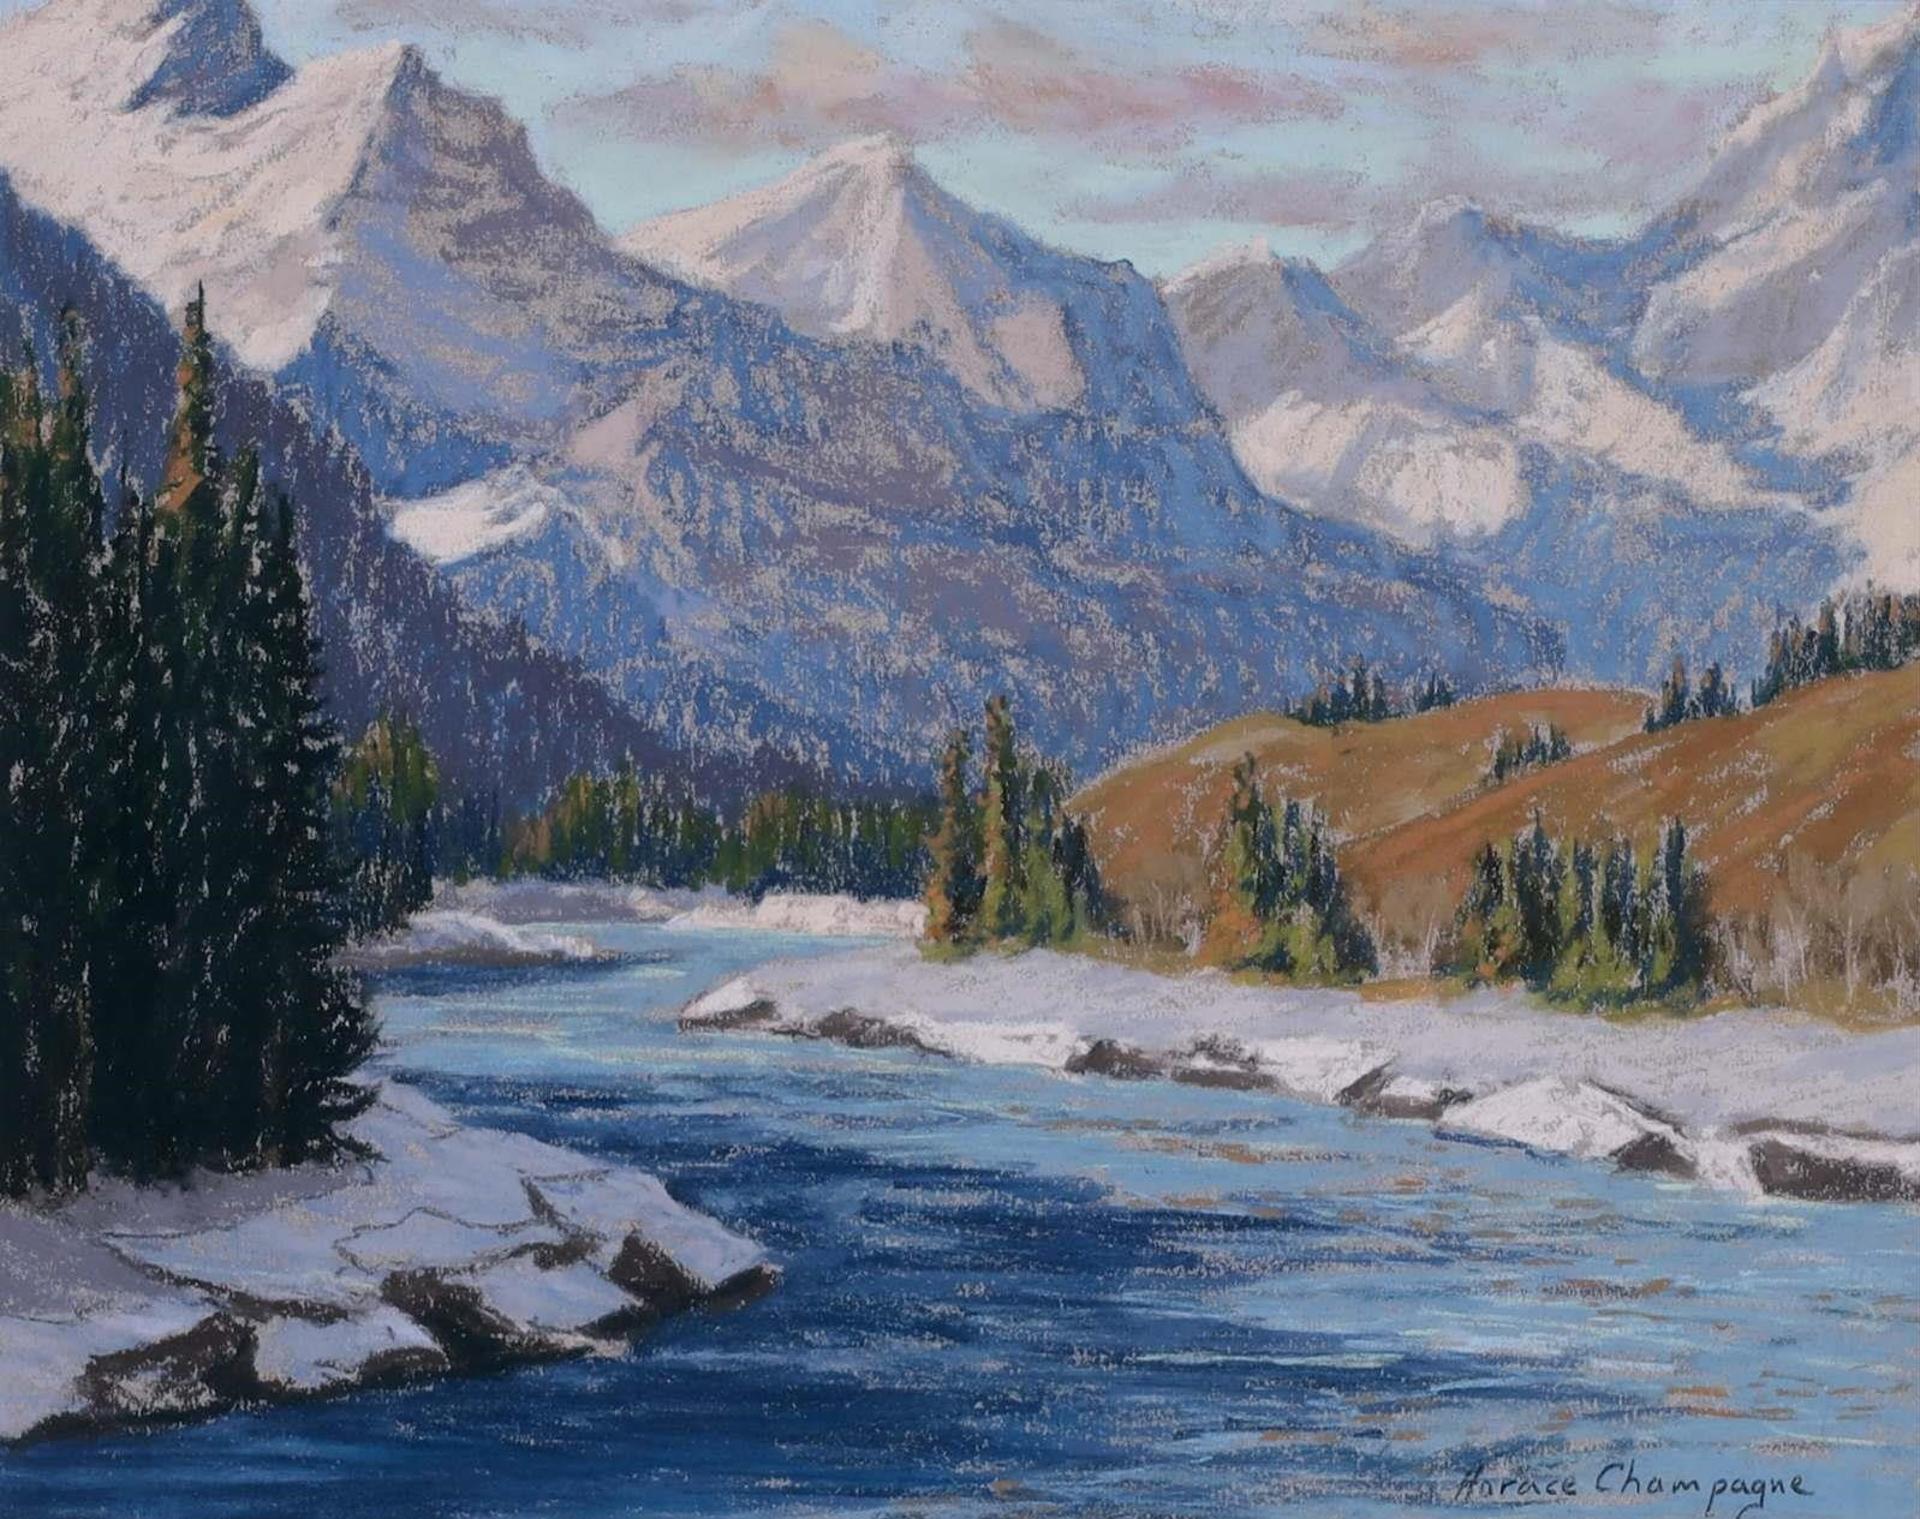 Horace Champagne (1937) - Bow River, Early Spring; 1988